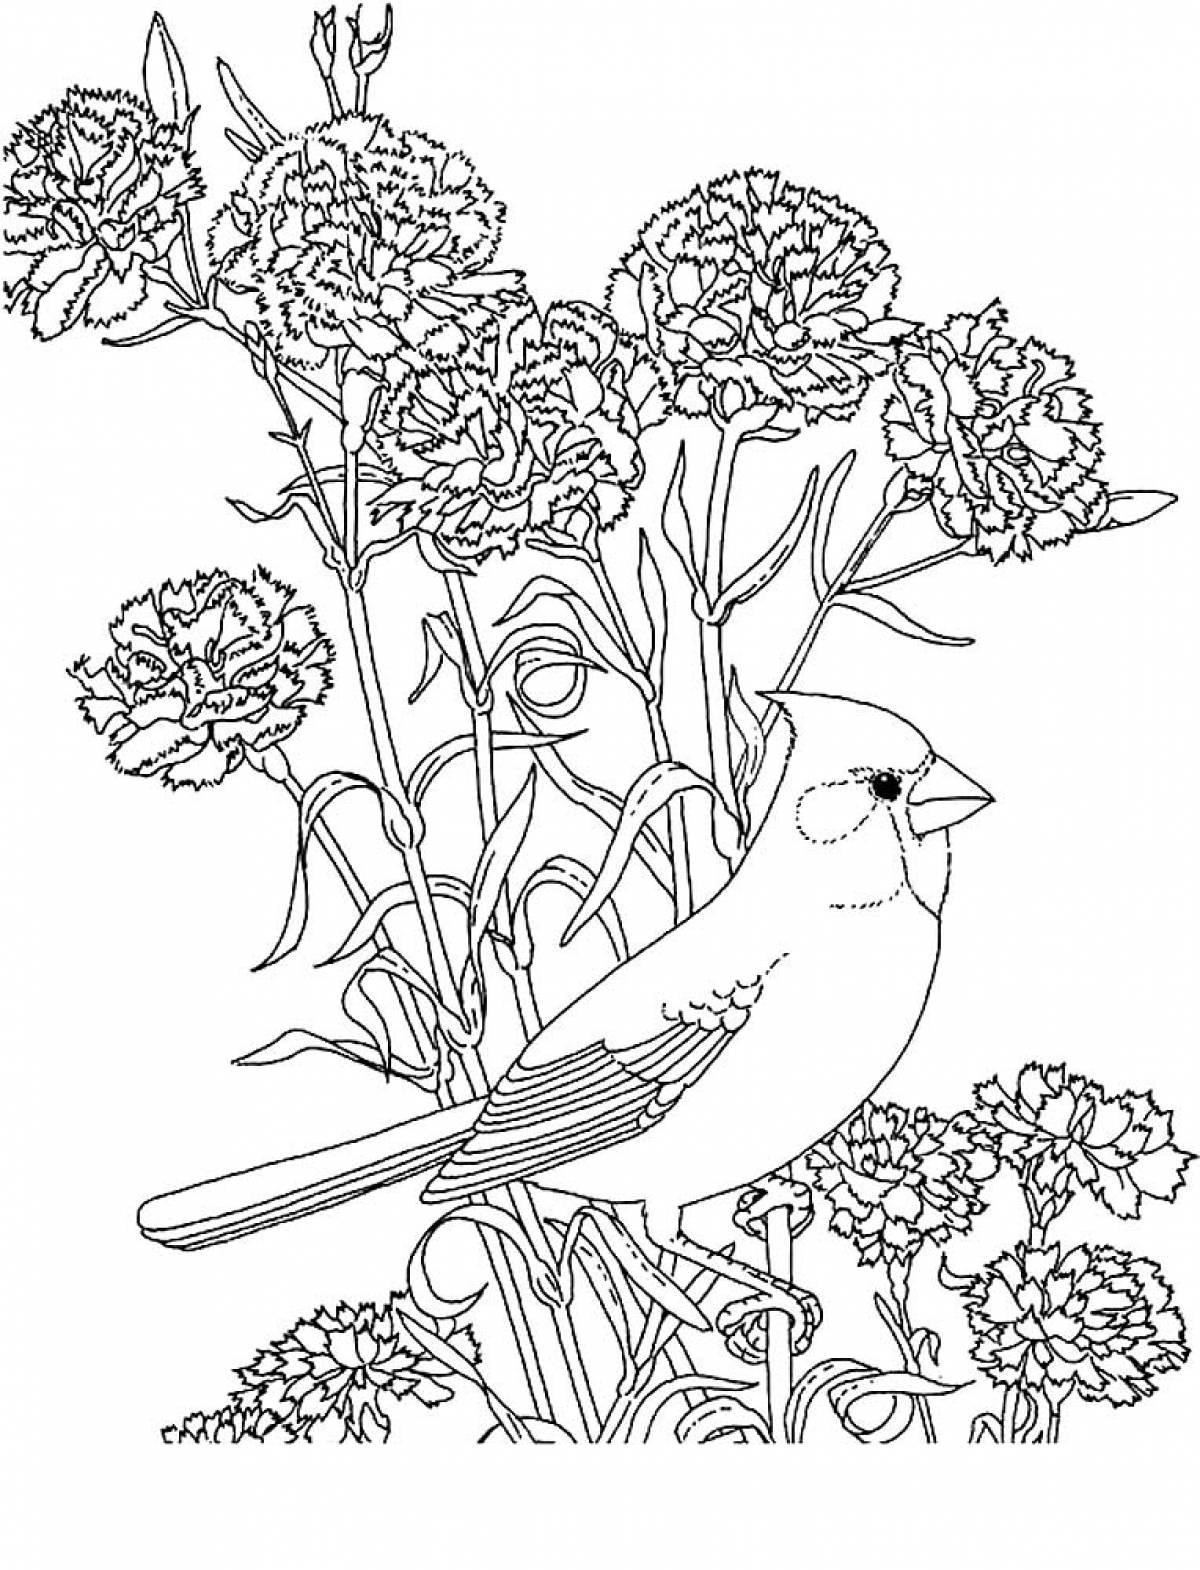 Carnations and bird